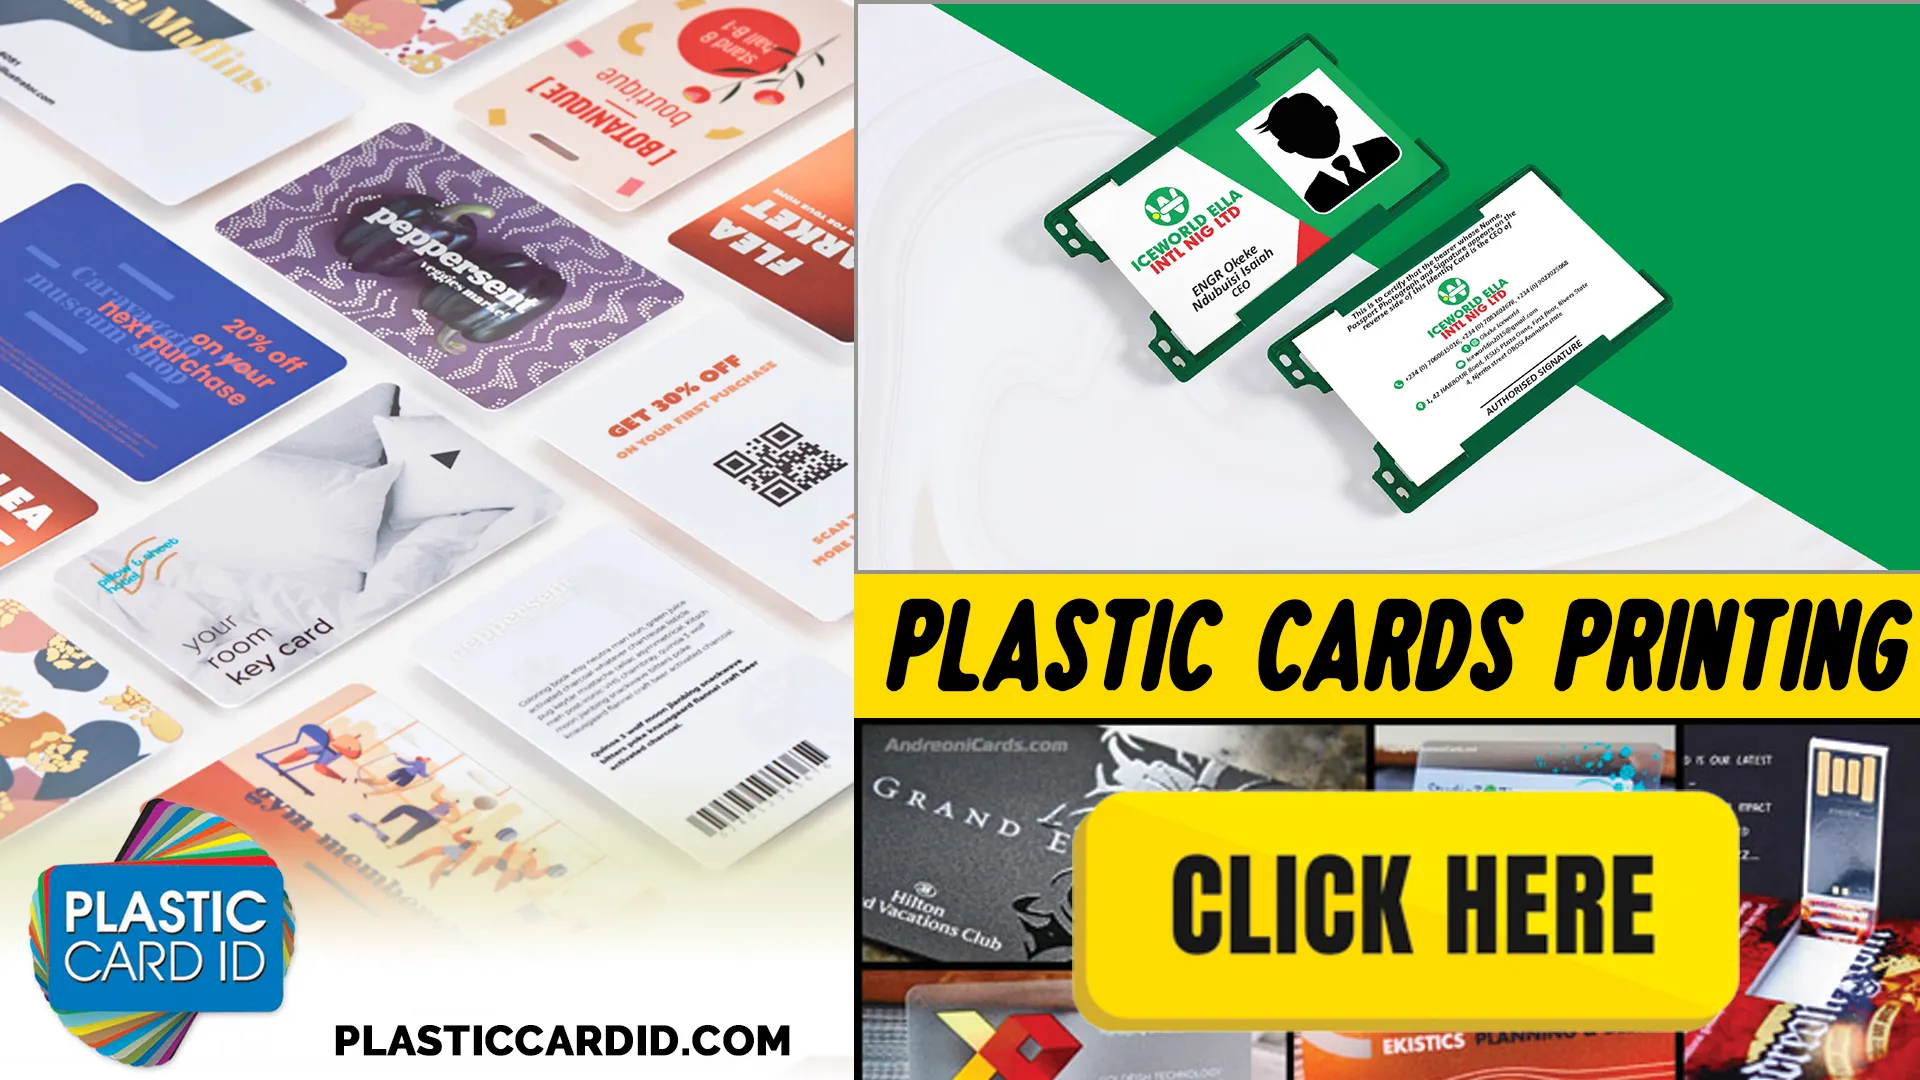 PCID



: A Spectrum of Card Printer Options